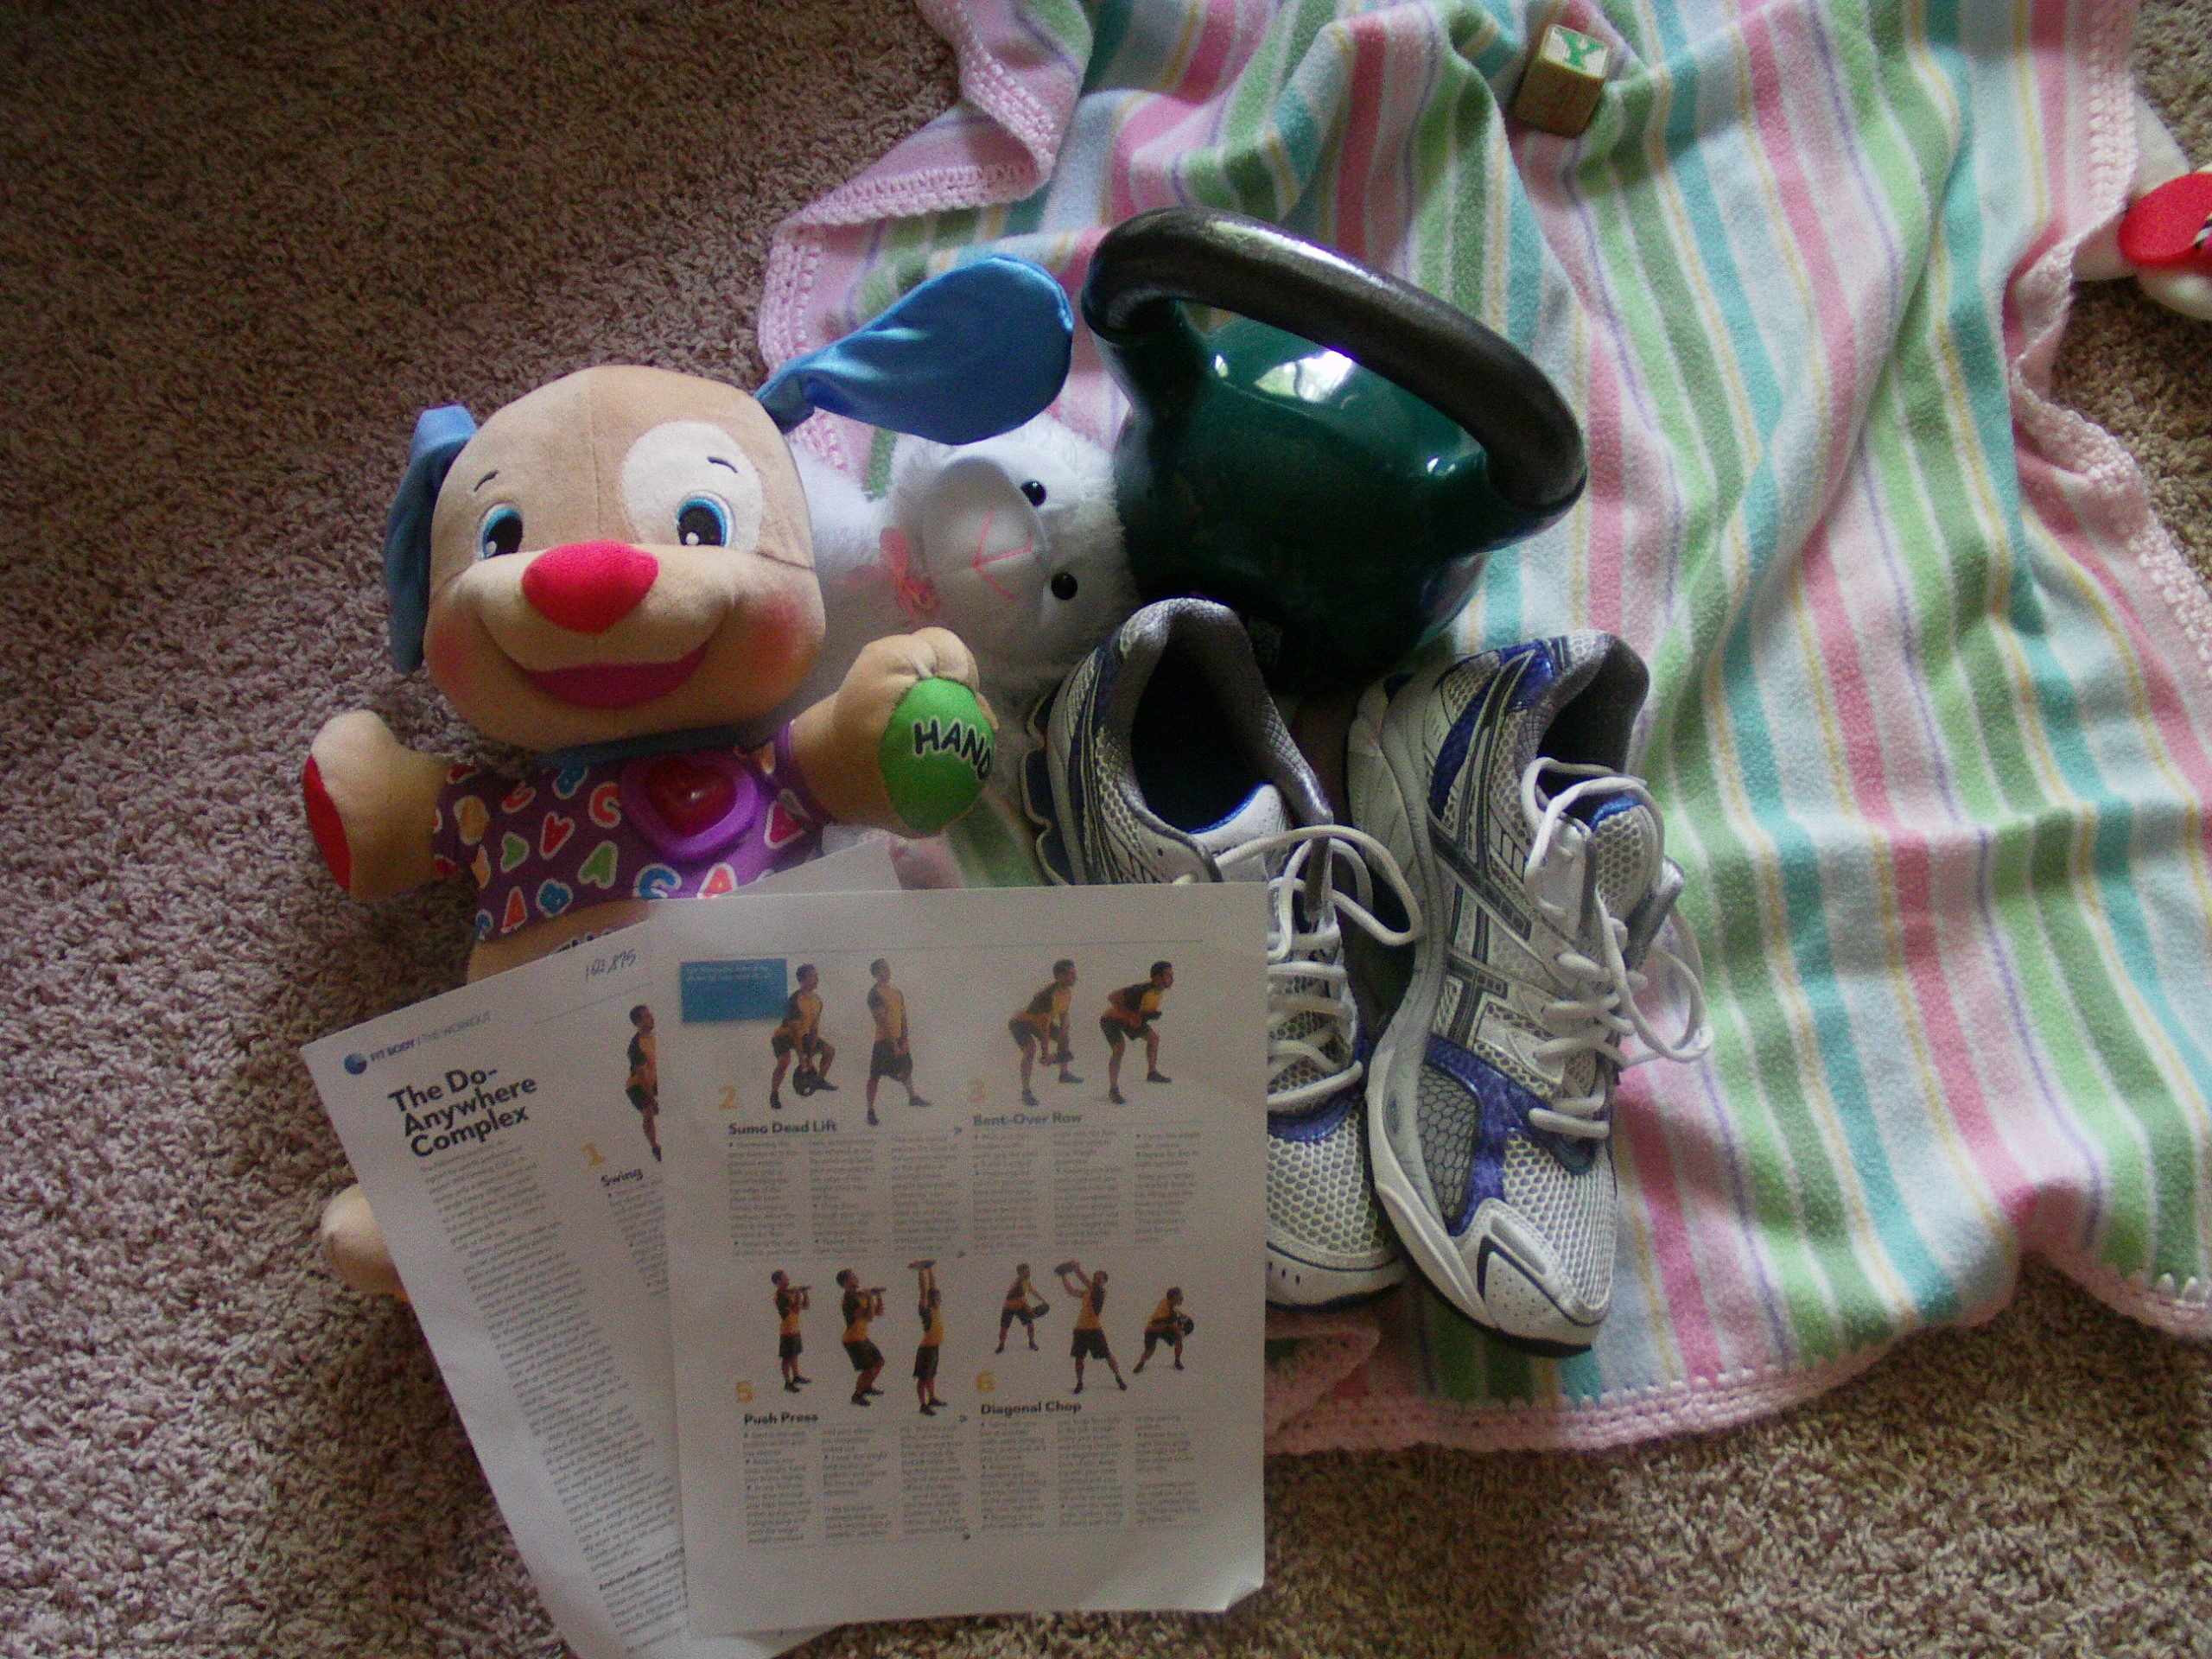 A baby blanket and exercise equipment are pictured on the floor.